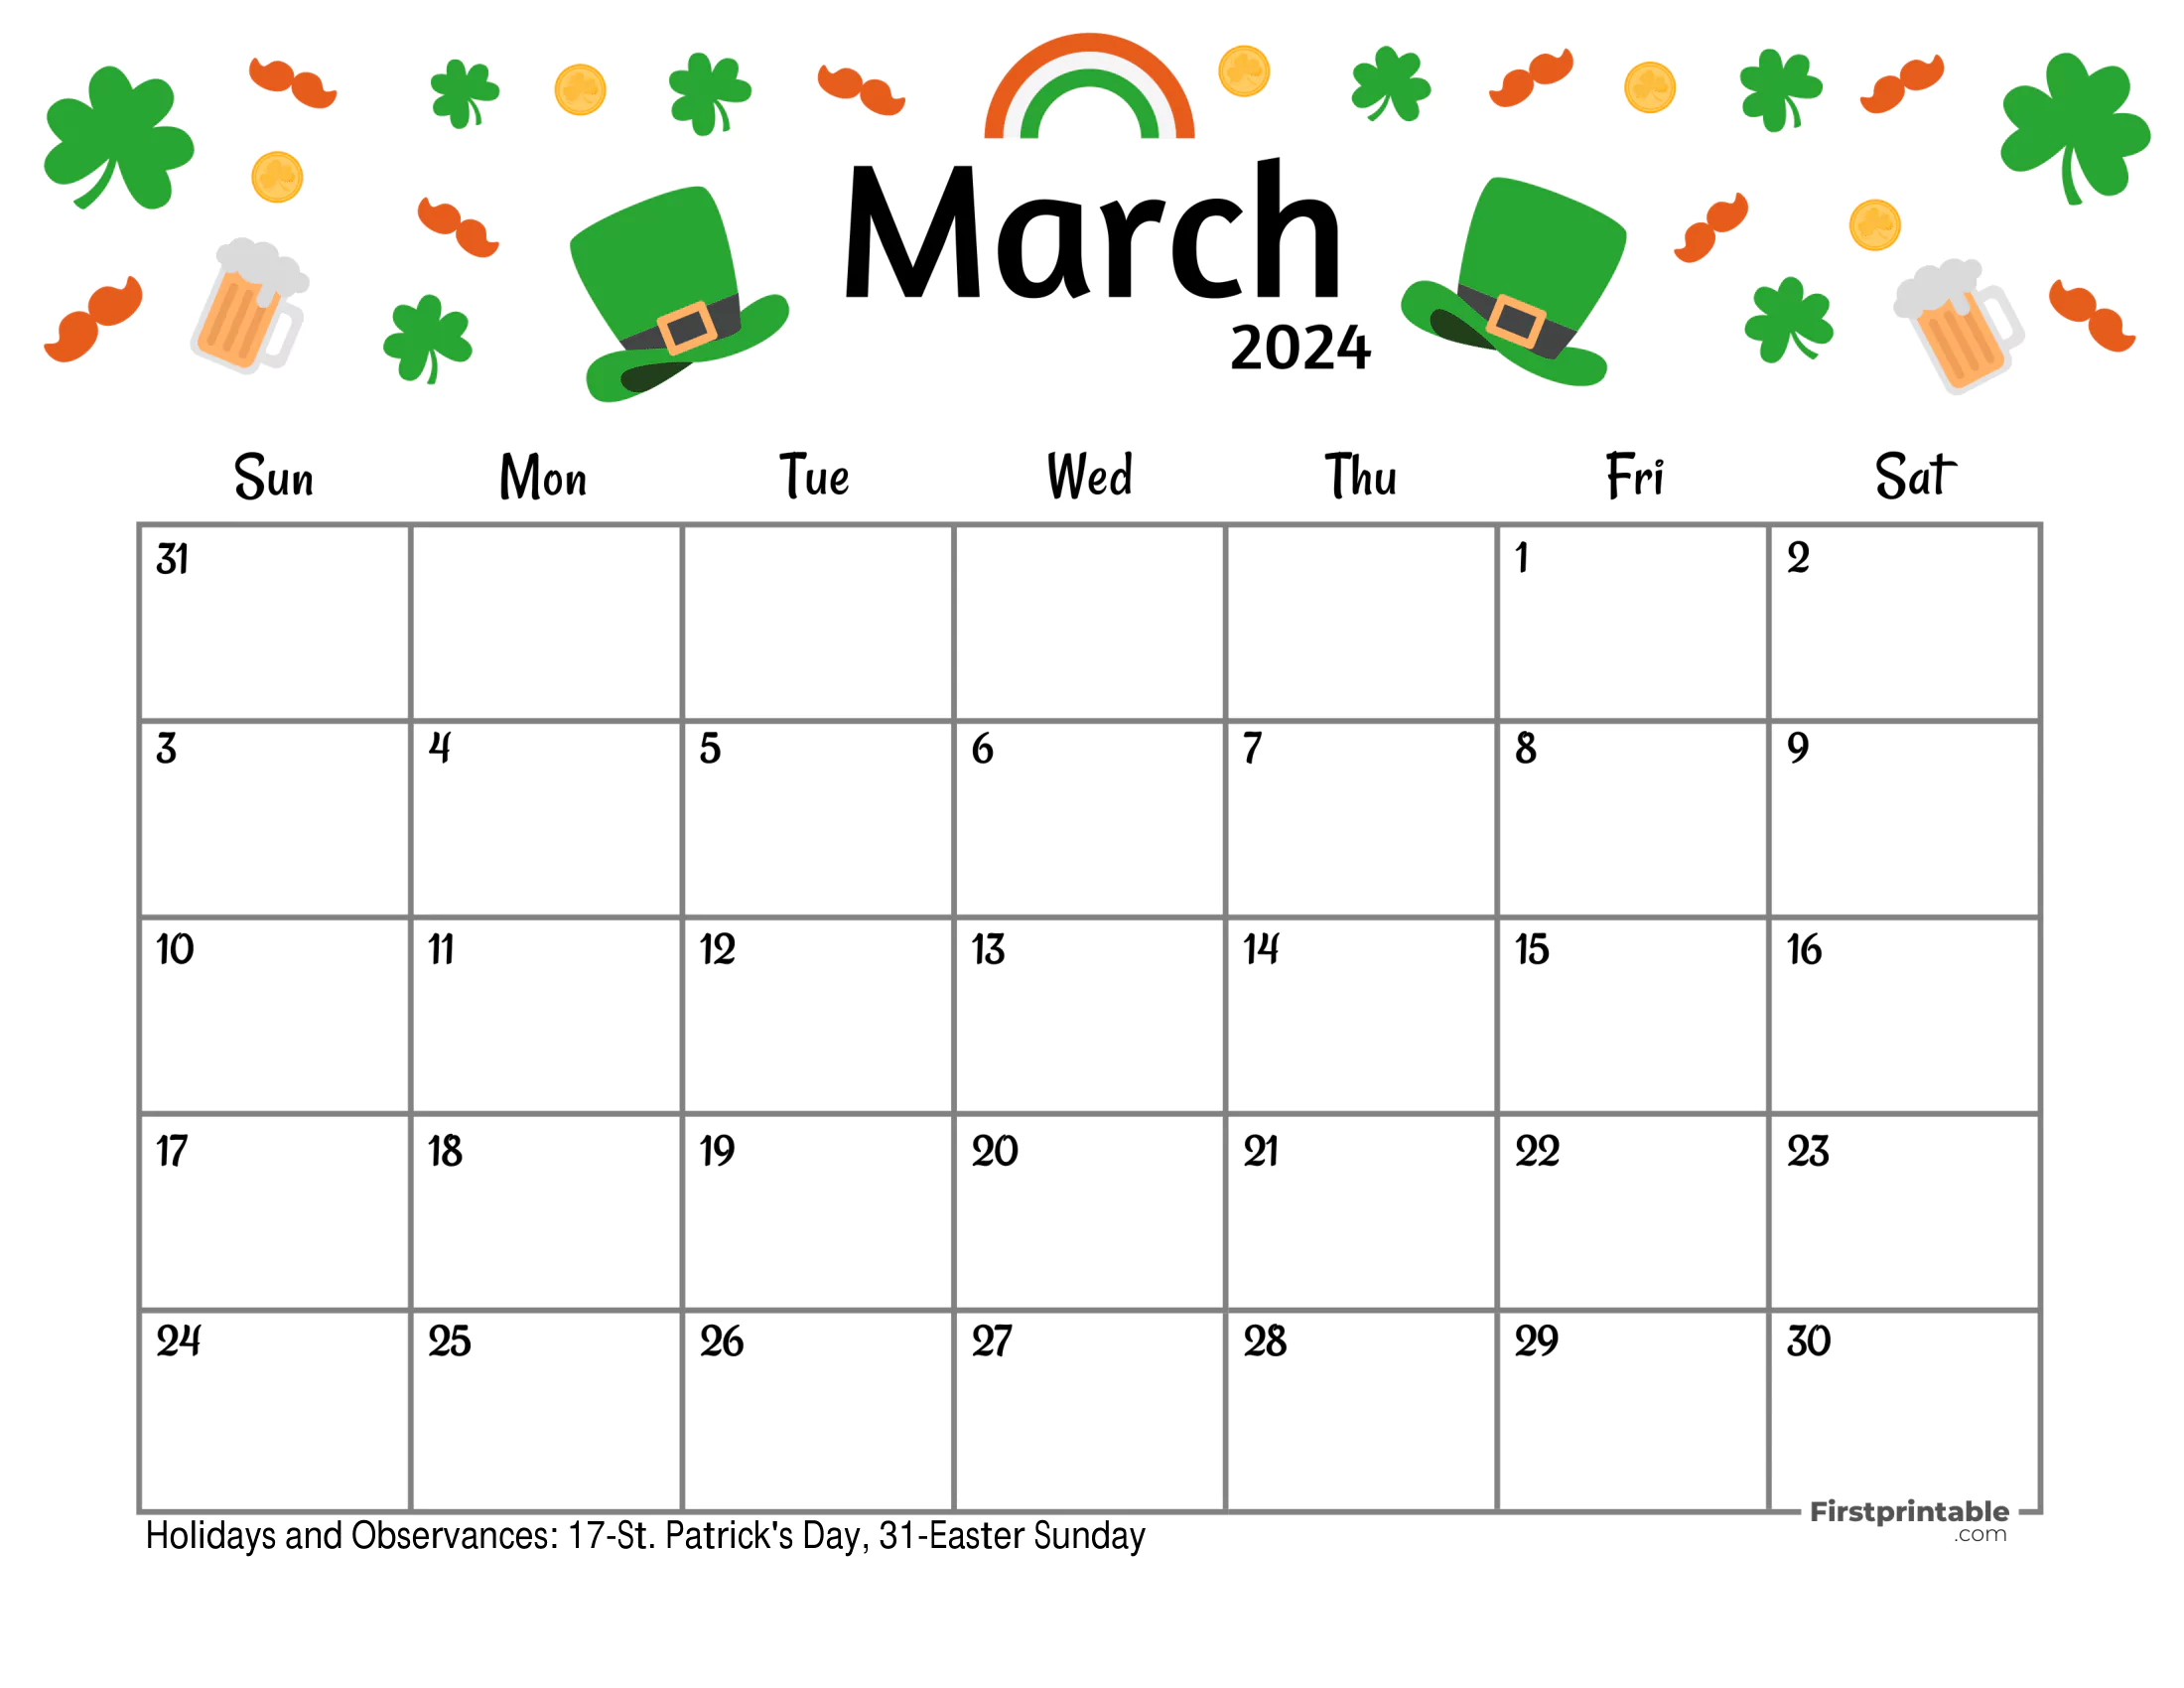 Free Printable & Fillable March Calendar 2024 with US holidays